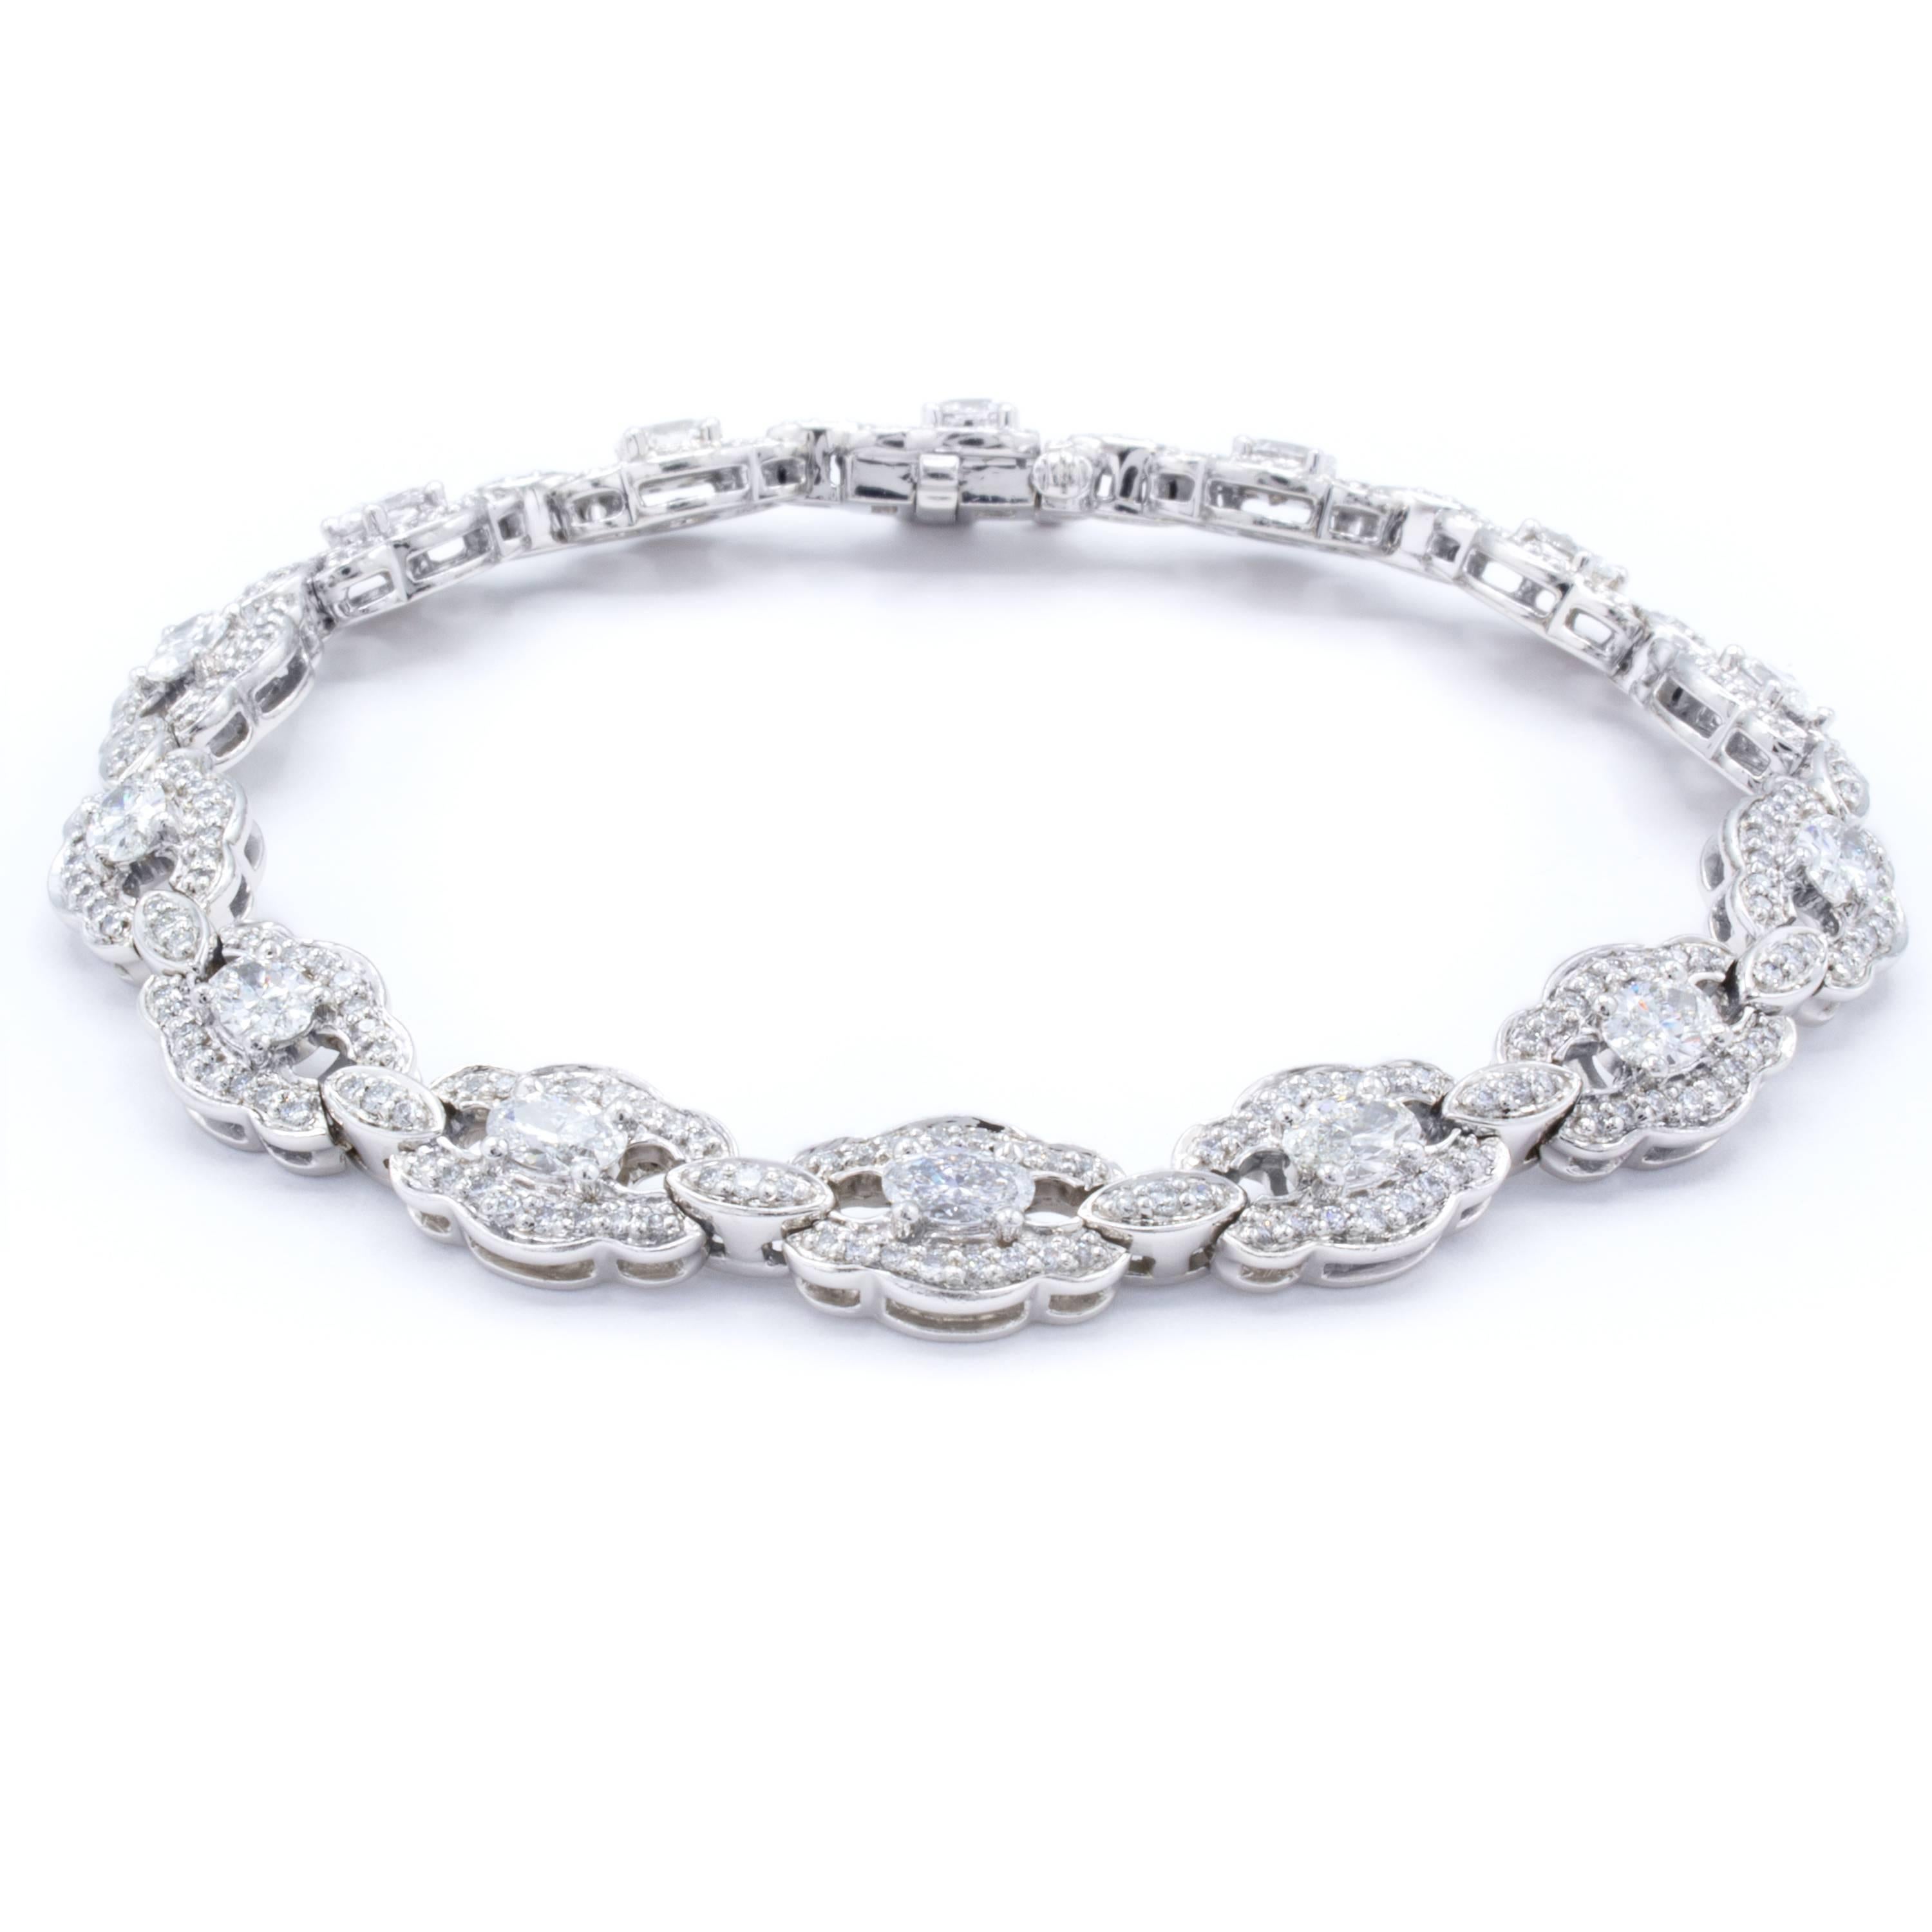 An elegant bracelet from Rosenberg Diamonds & Co. gathering 3.33 carats of glittering diamonds in oval cut and round brilliant shapes. The stones are set into a beautifully designed platinum band that is both slim and intricate enough to make the